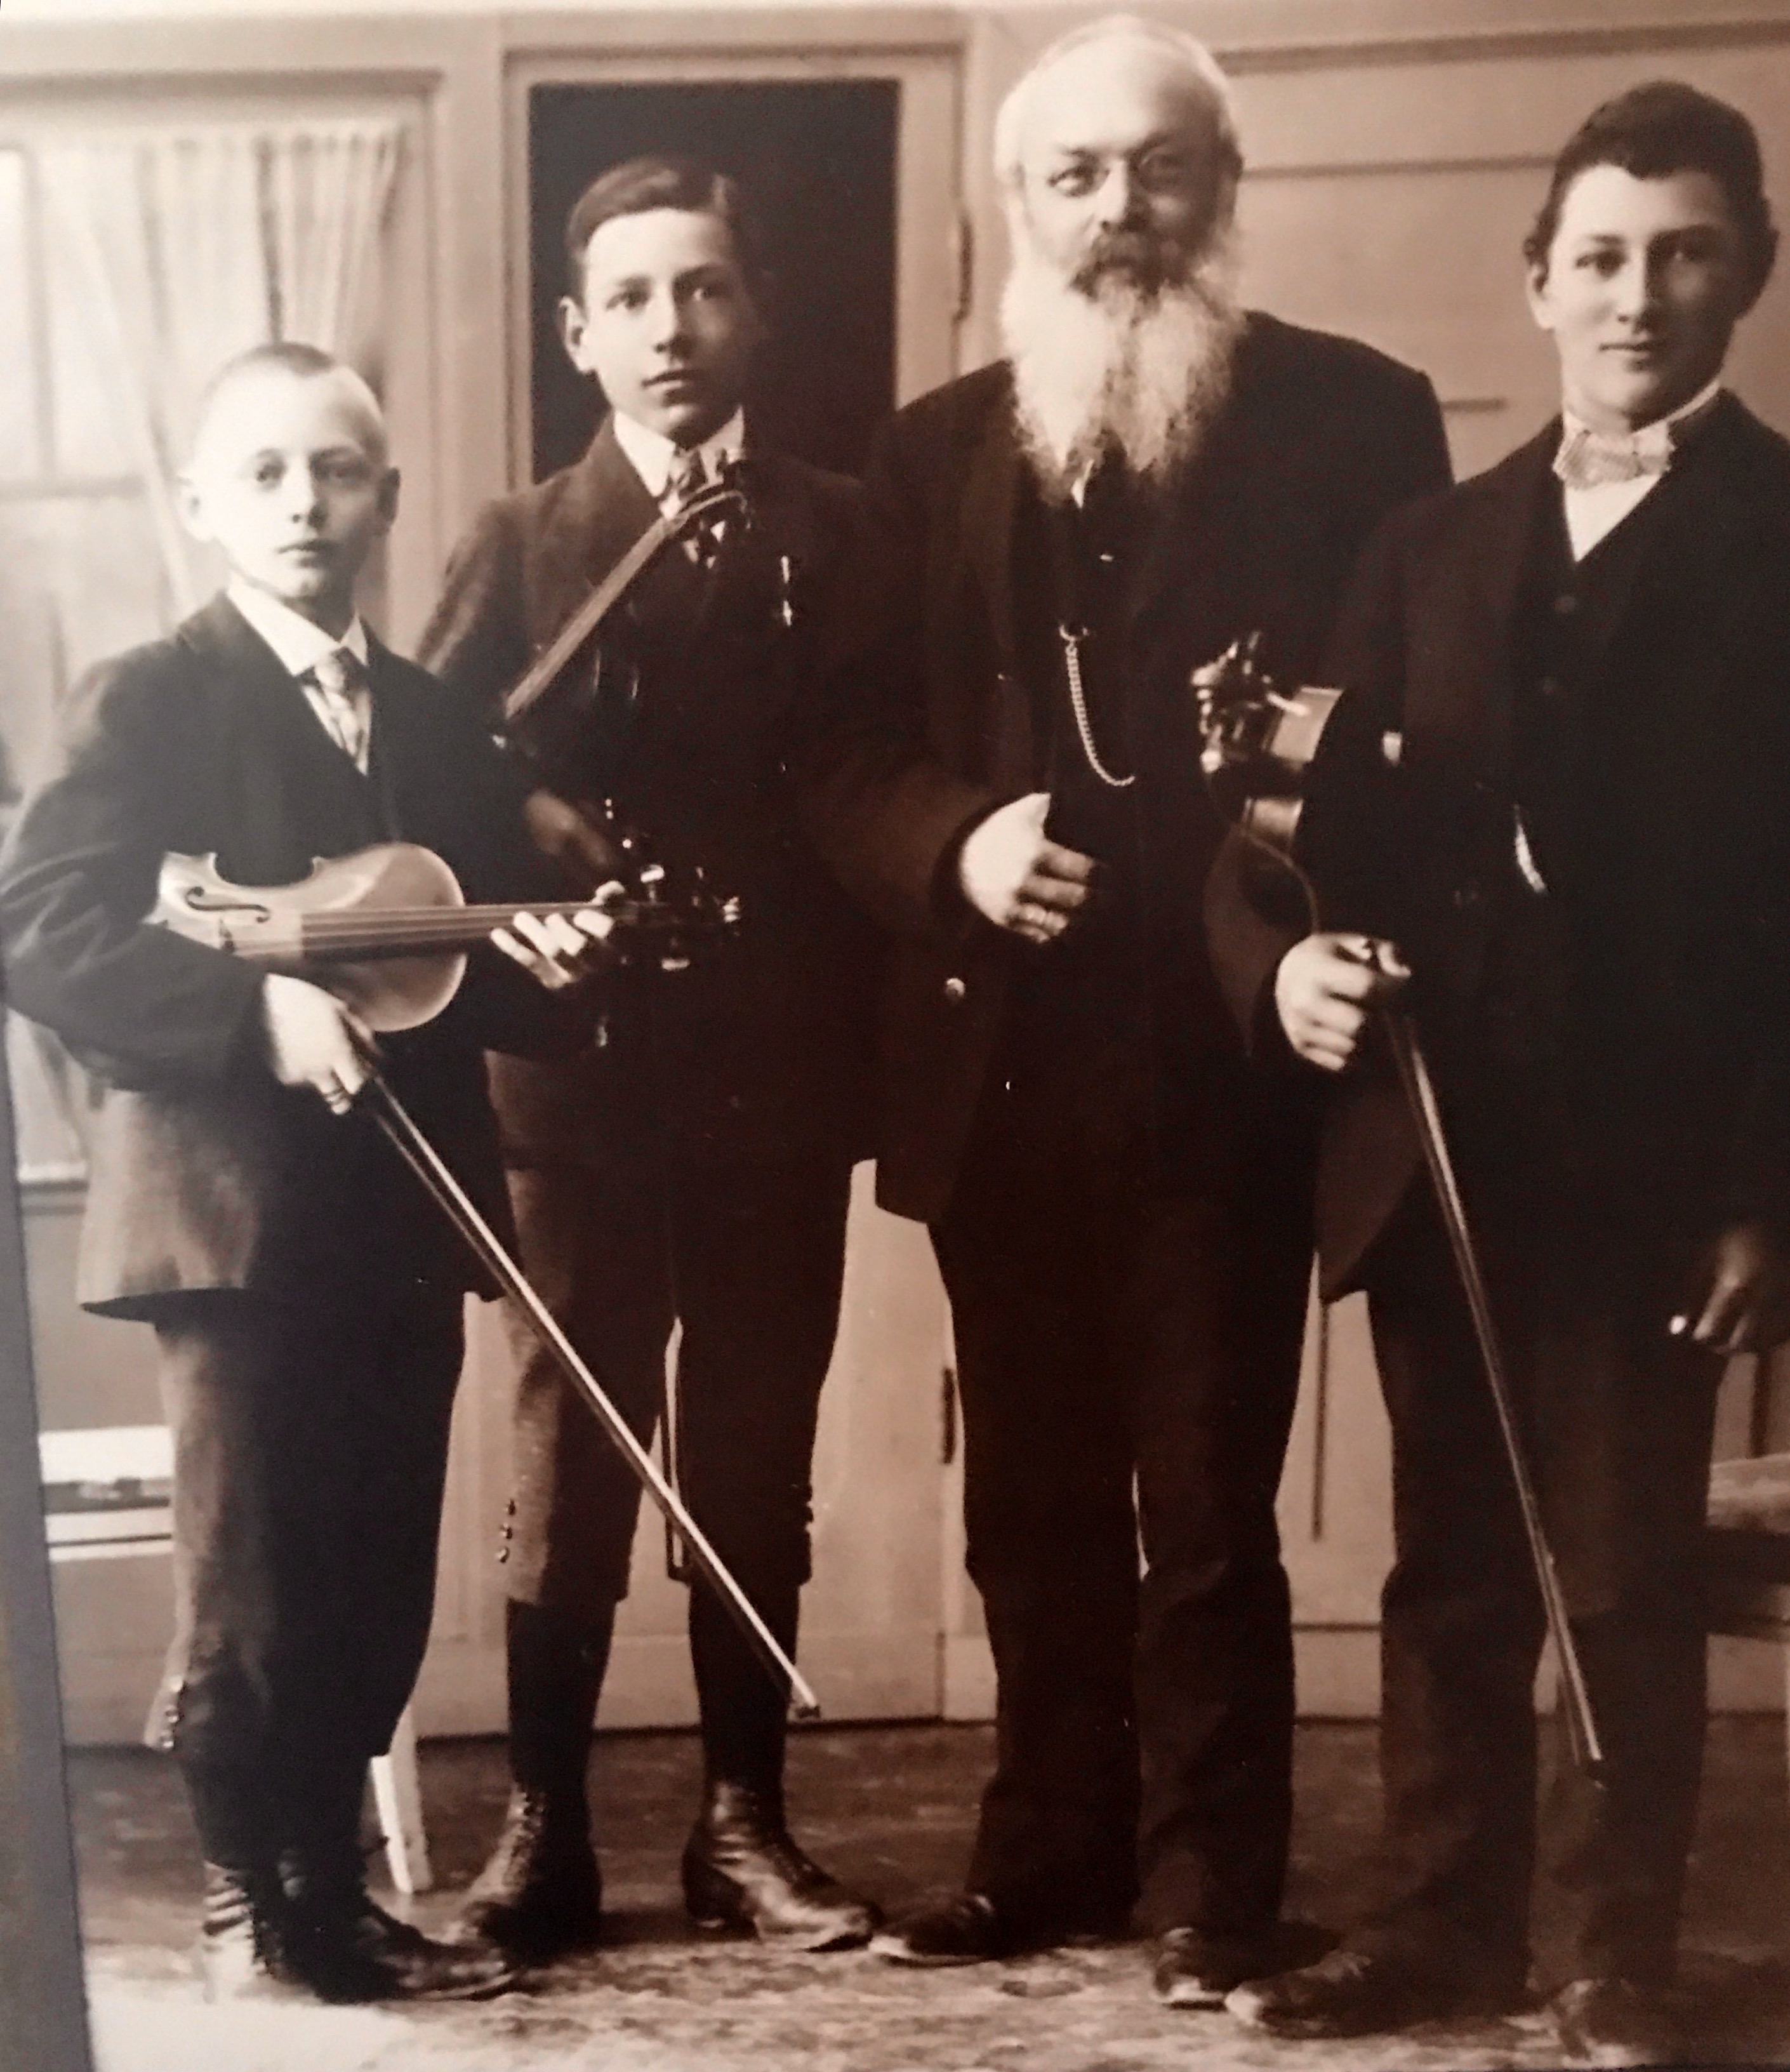 My Dad, Alexander Schafroth, 2nd from the left, 13 years old with his music teacher, and Two if his fellow students in Immenstadt, Germany 1913